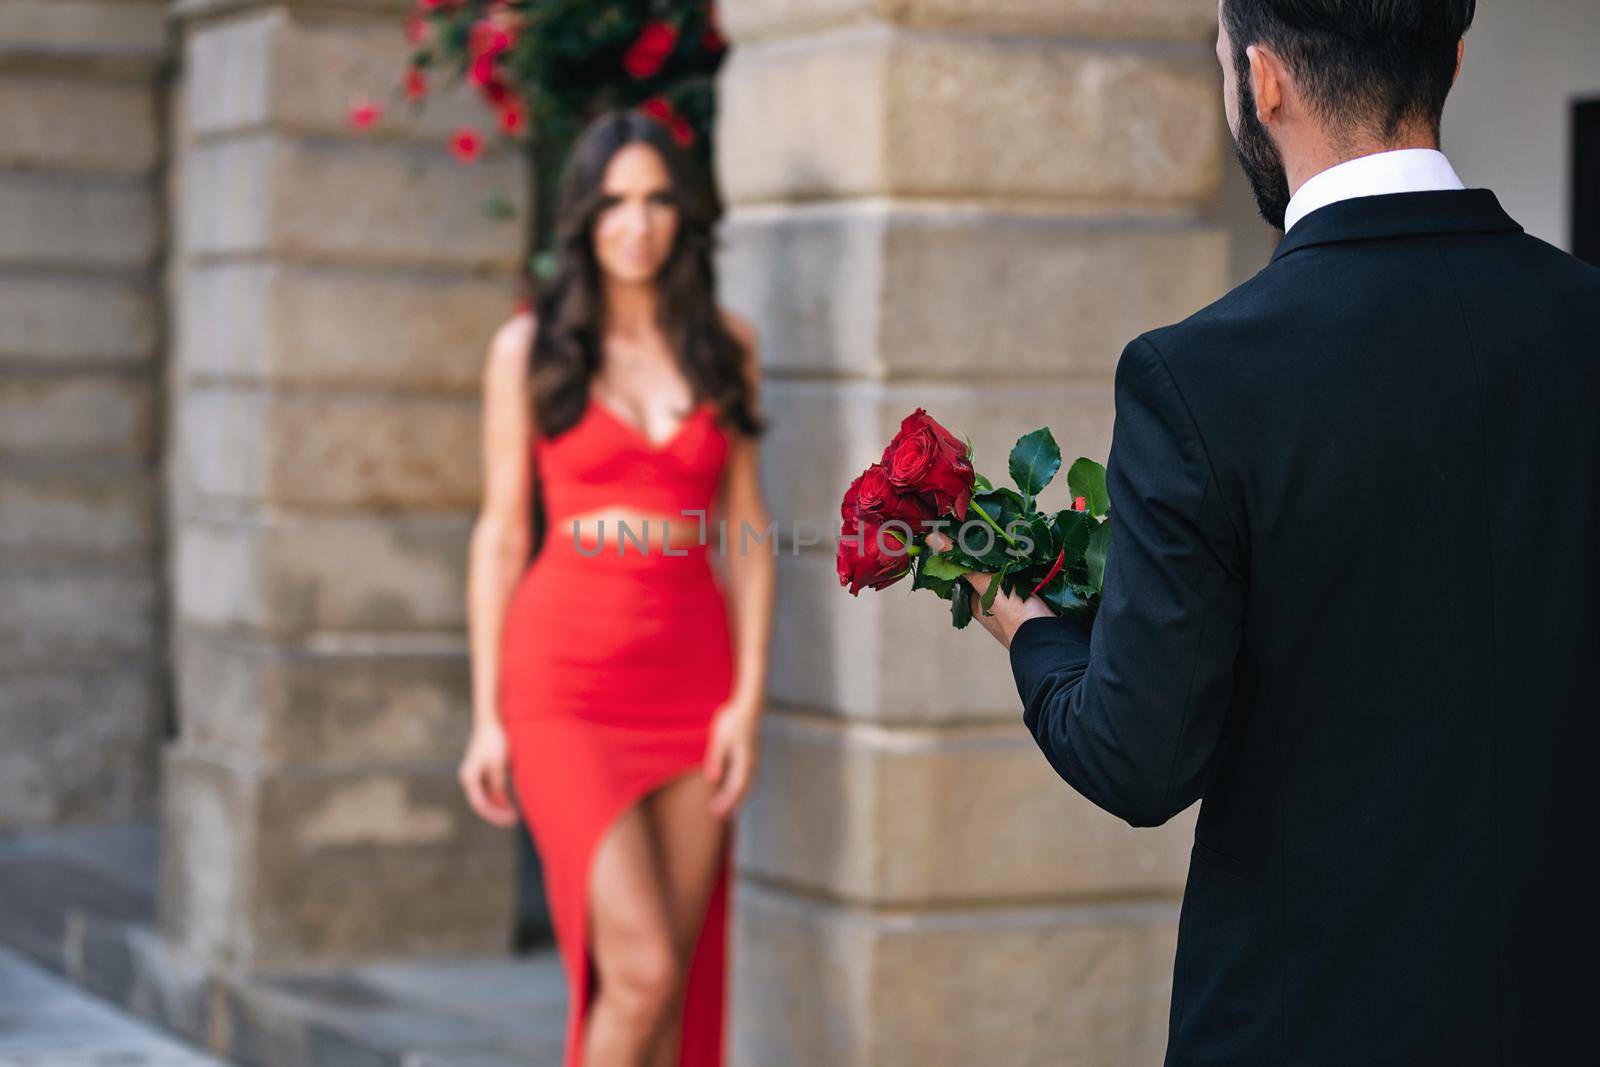 Back view of a man giving a bouquet of red roses to a woman during romantic dating.